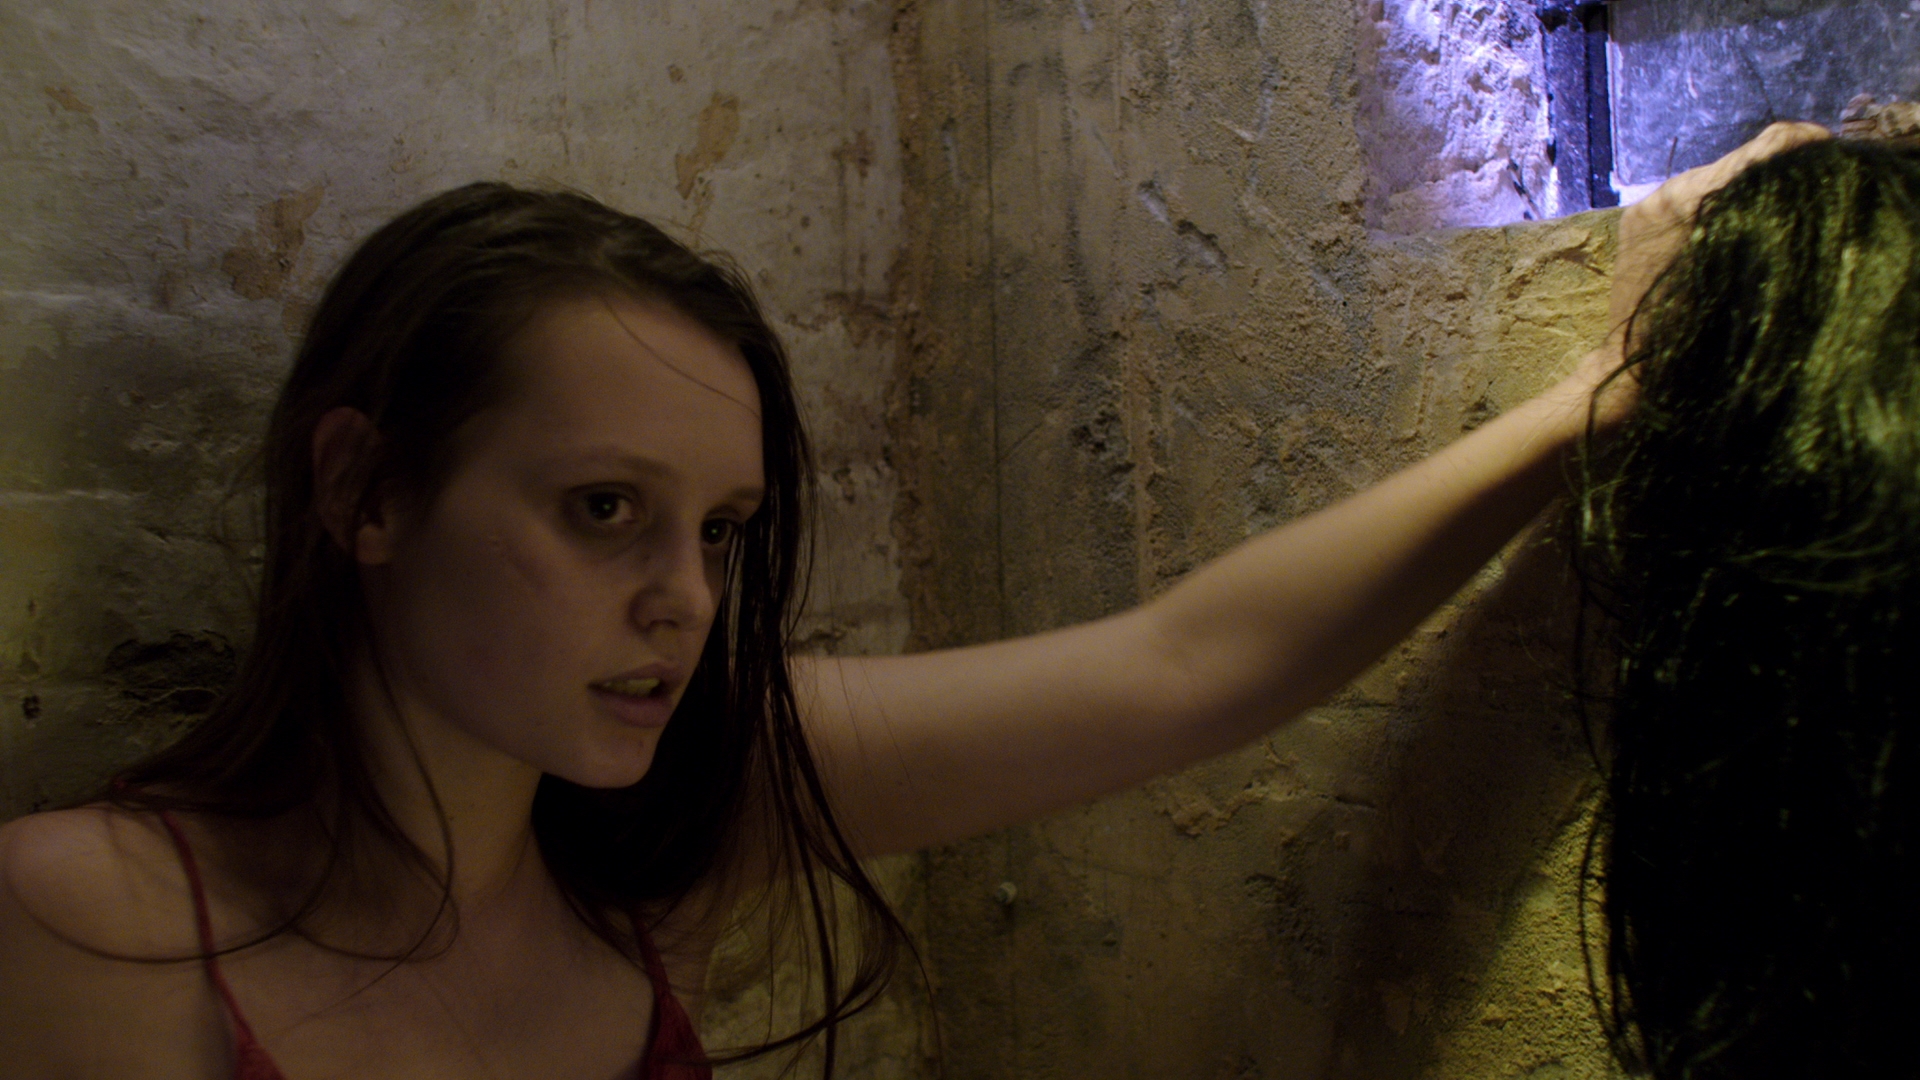 Still from short film: 'Rough Silk' - written and directed by Kristine Schoffman